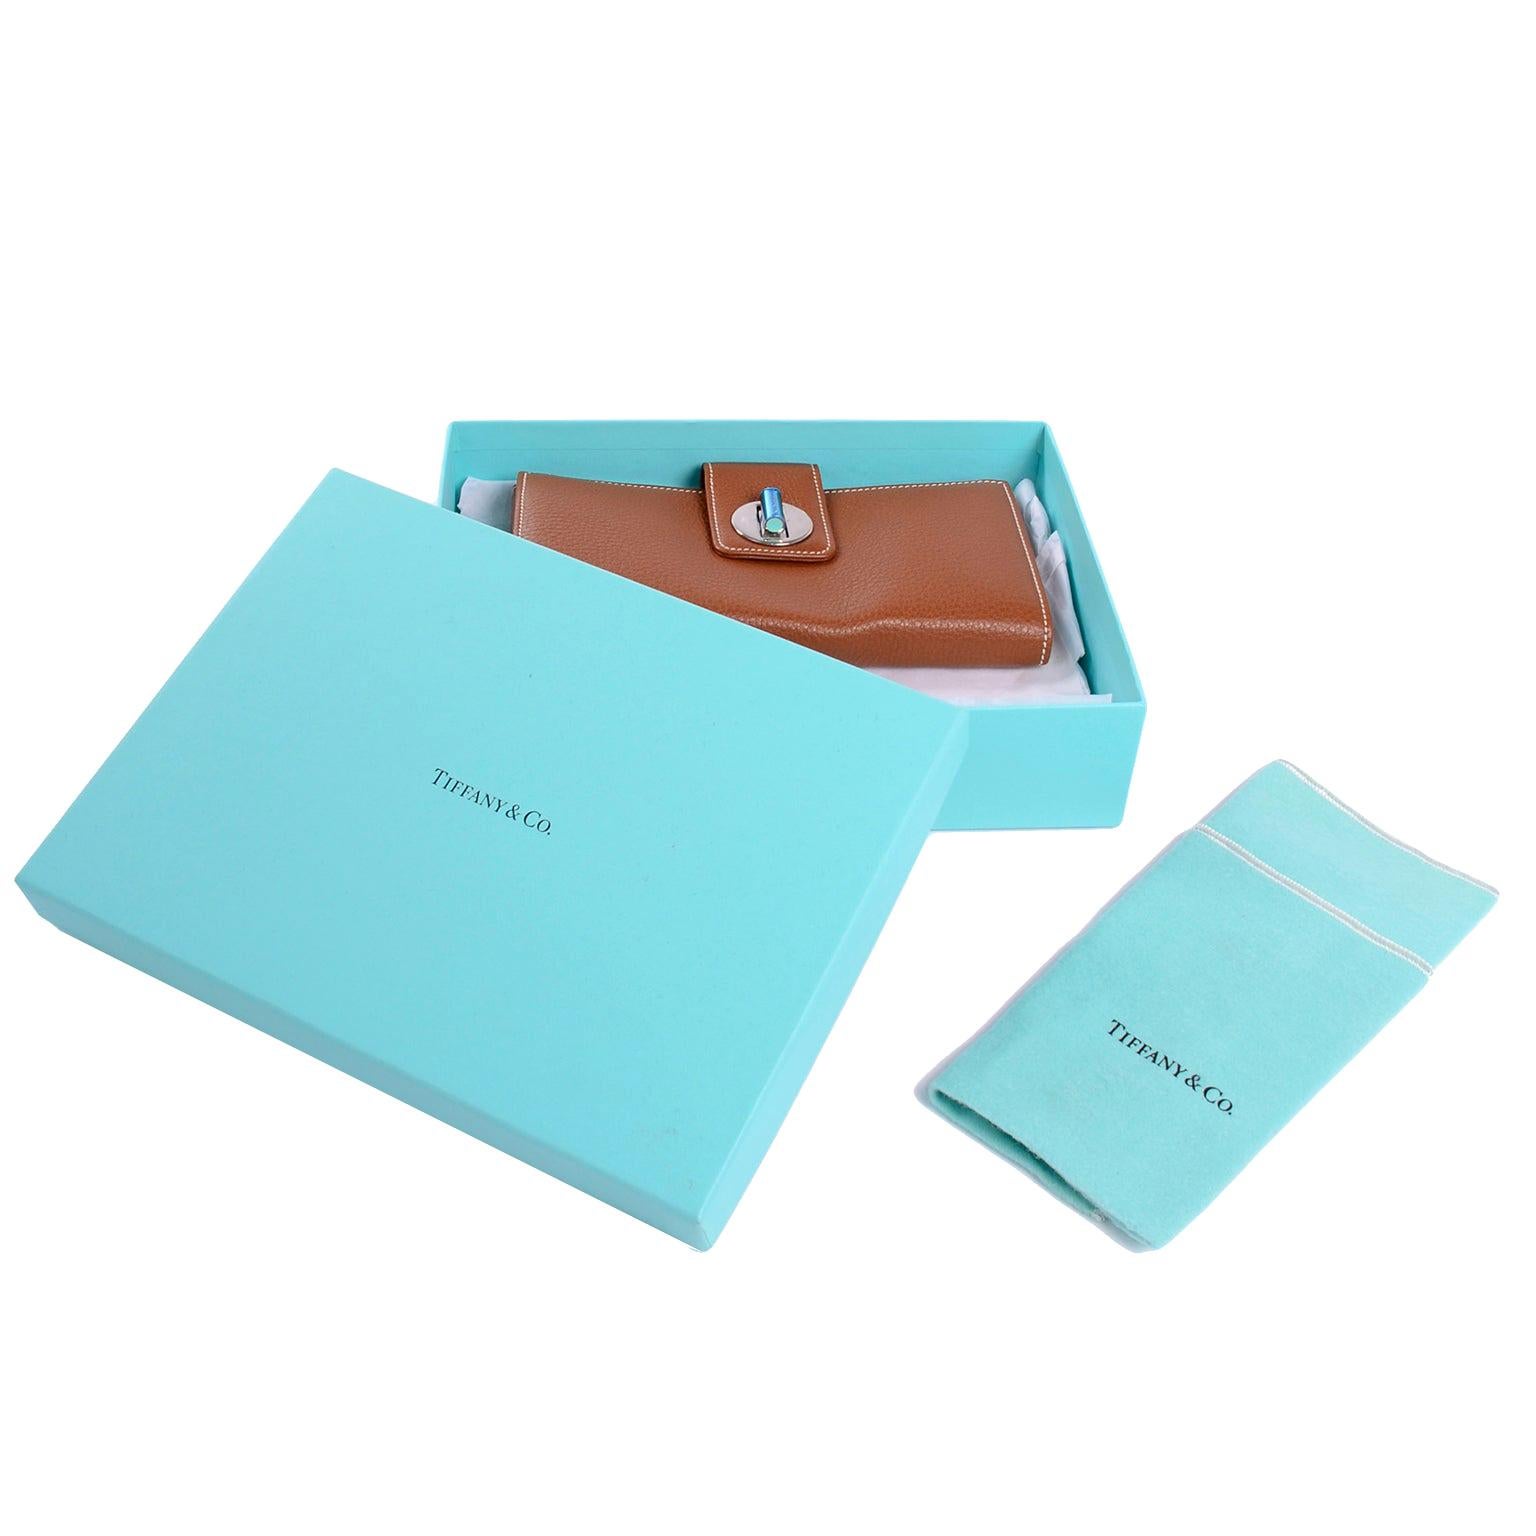 Tiffany & Co Brown Leather Wallet New in Original Blue Box With Dustbag